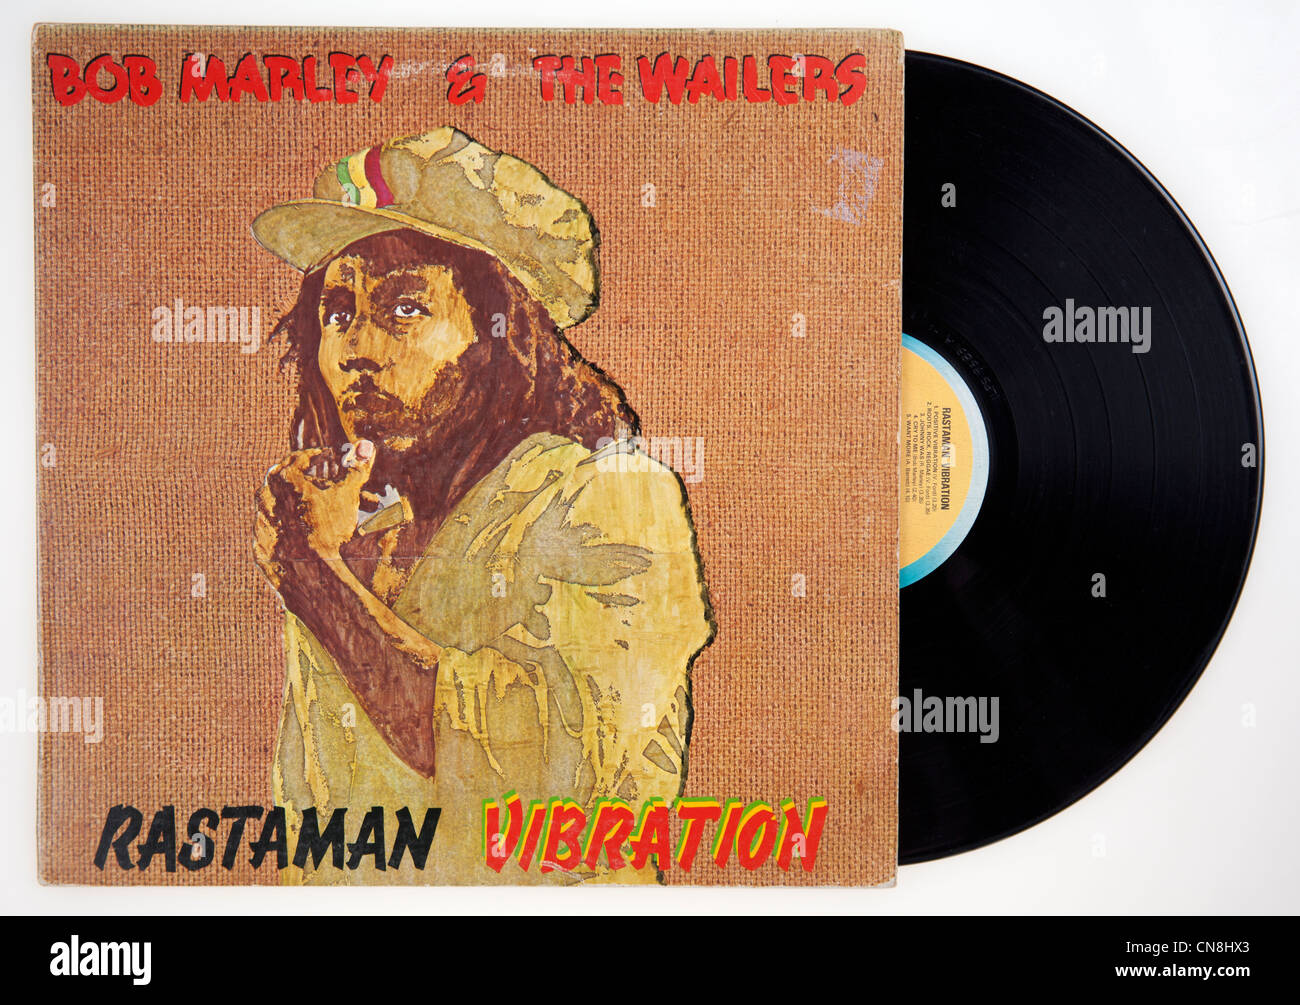 Cover of vinyl album Rastaman Vibrations by Bob Marley & The Wailers,  released 1976 on Island record label Stock Photo - Alamy